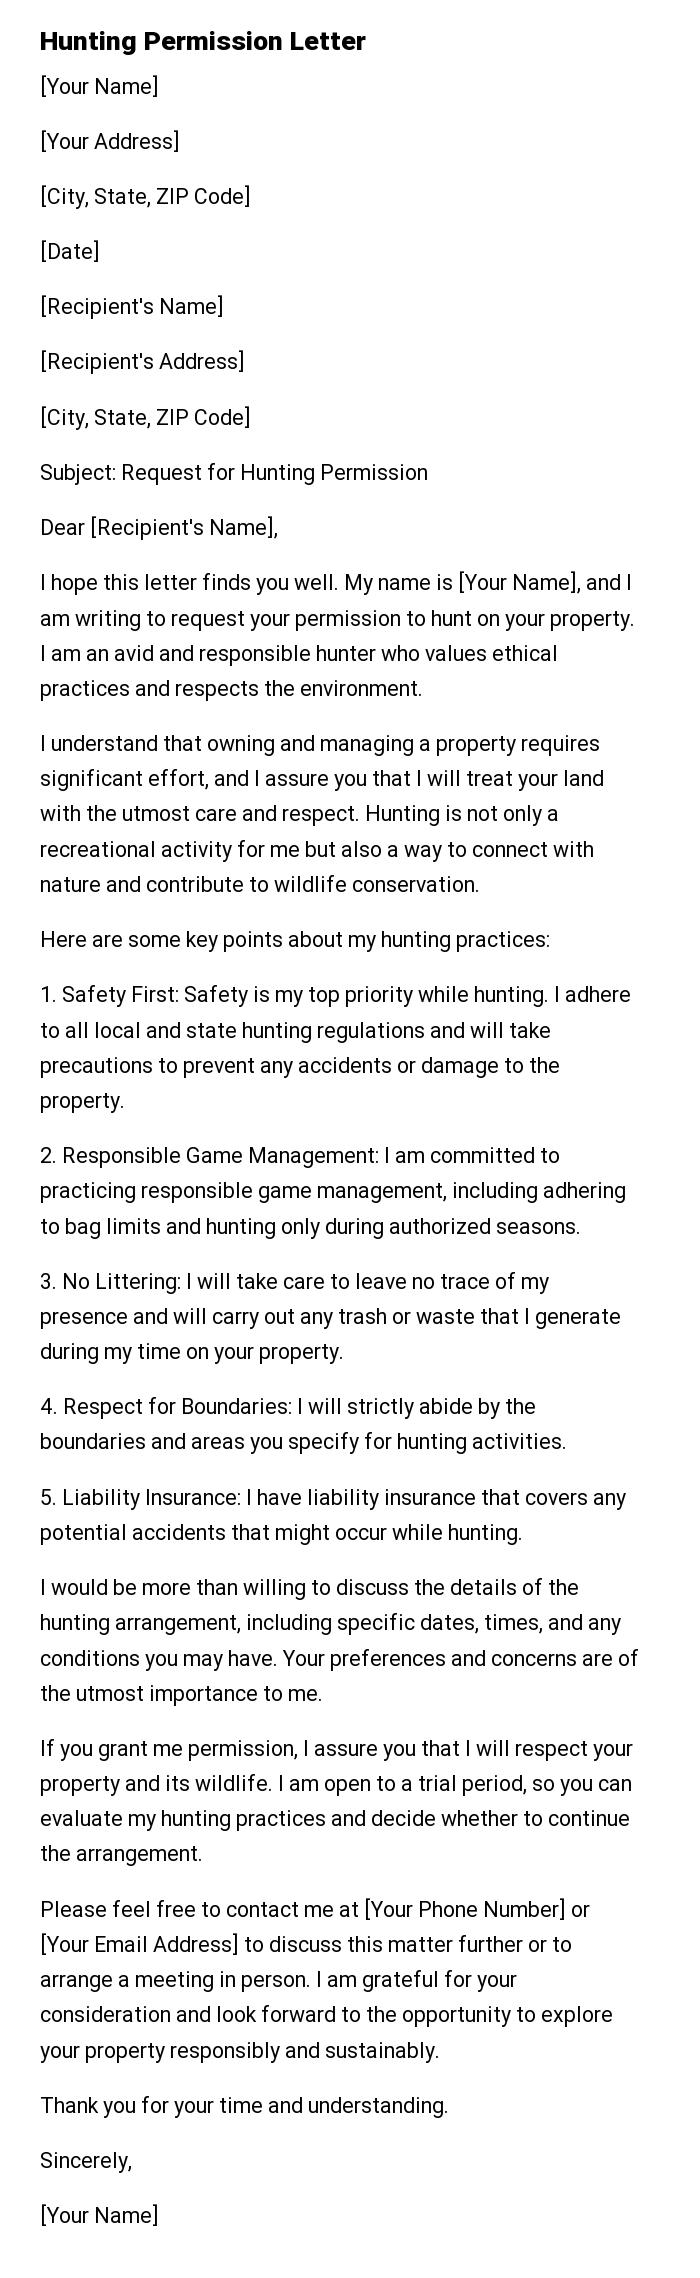 Hunting Permission Letter